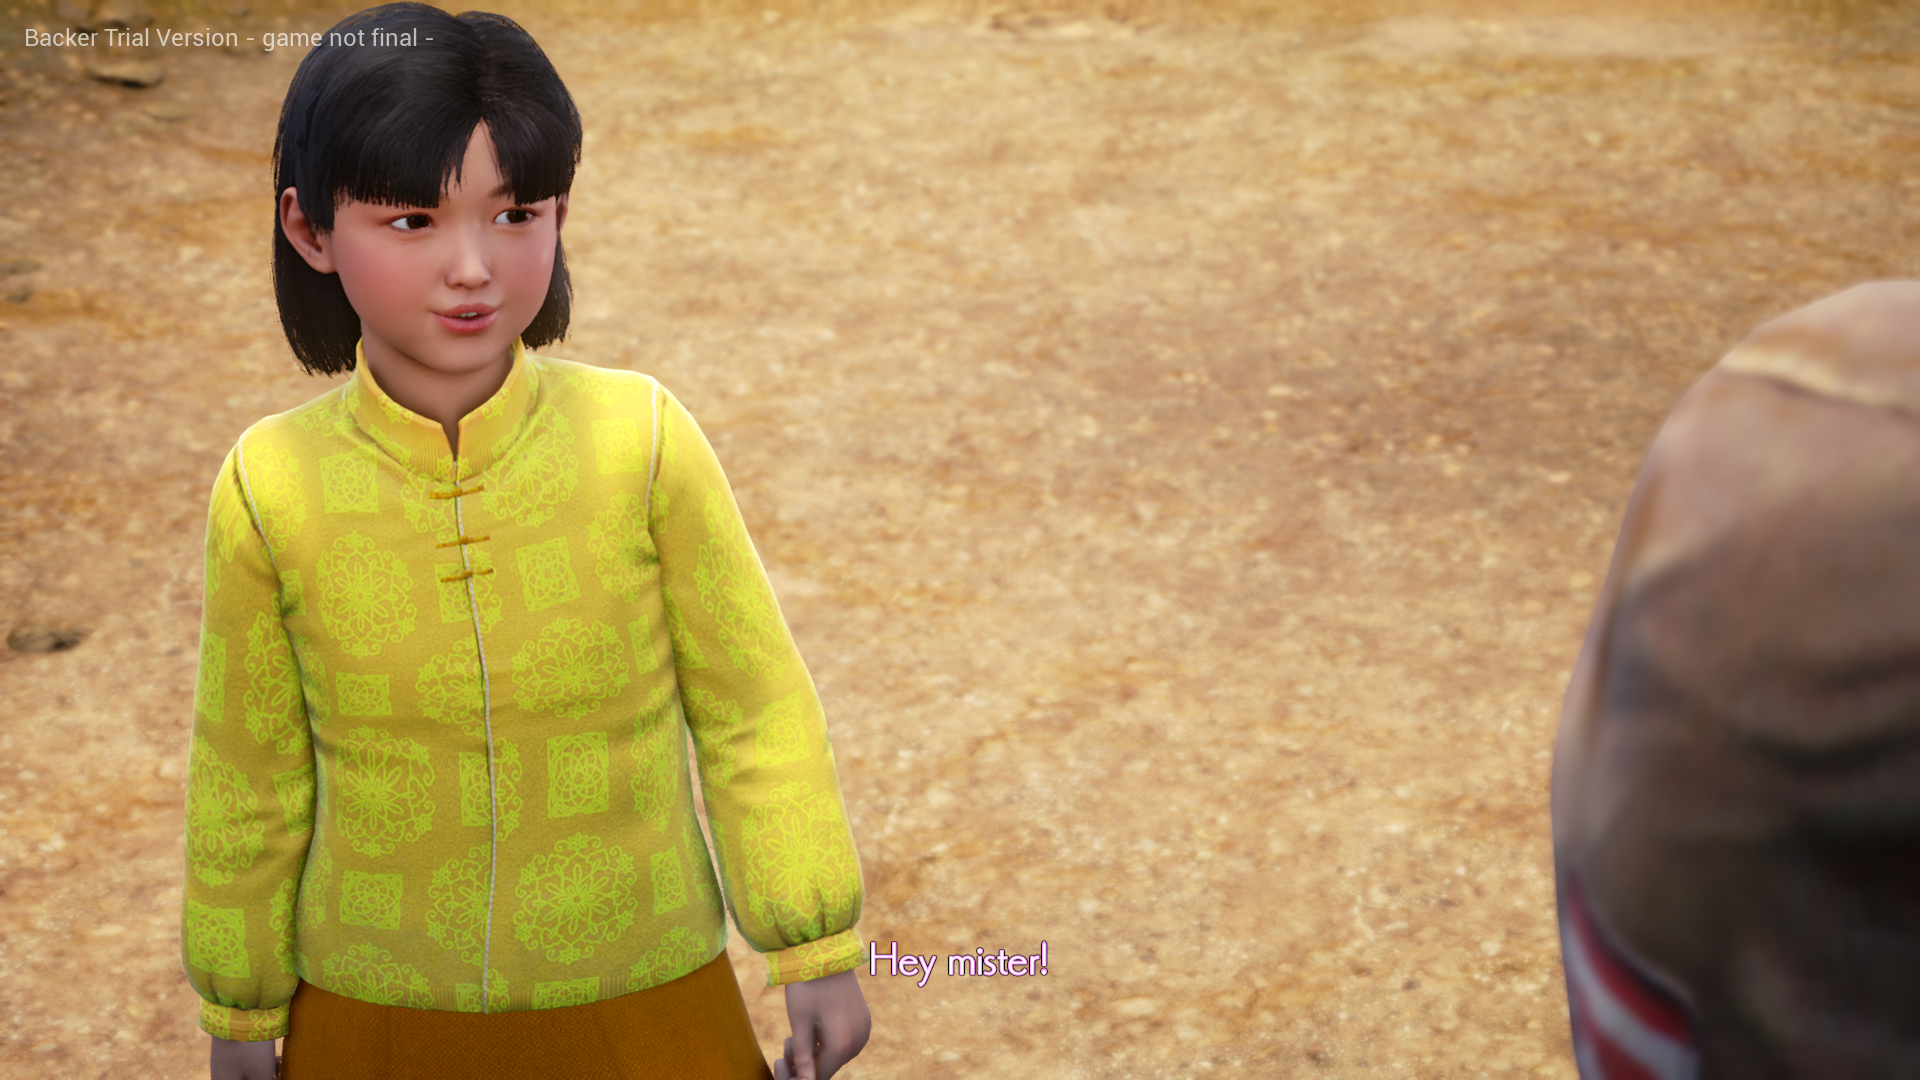 shenmue3-win64-shippil4kzz.png